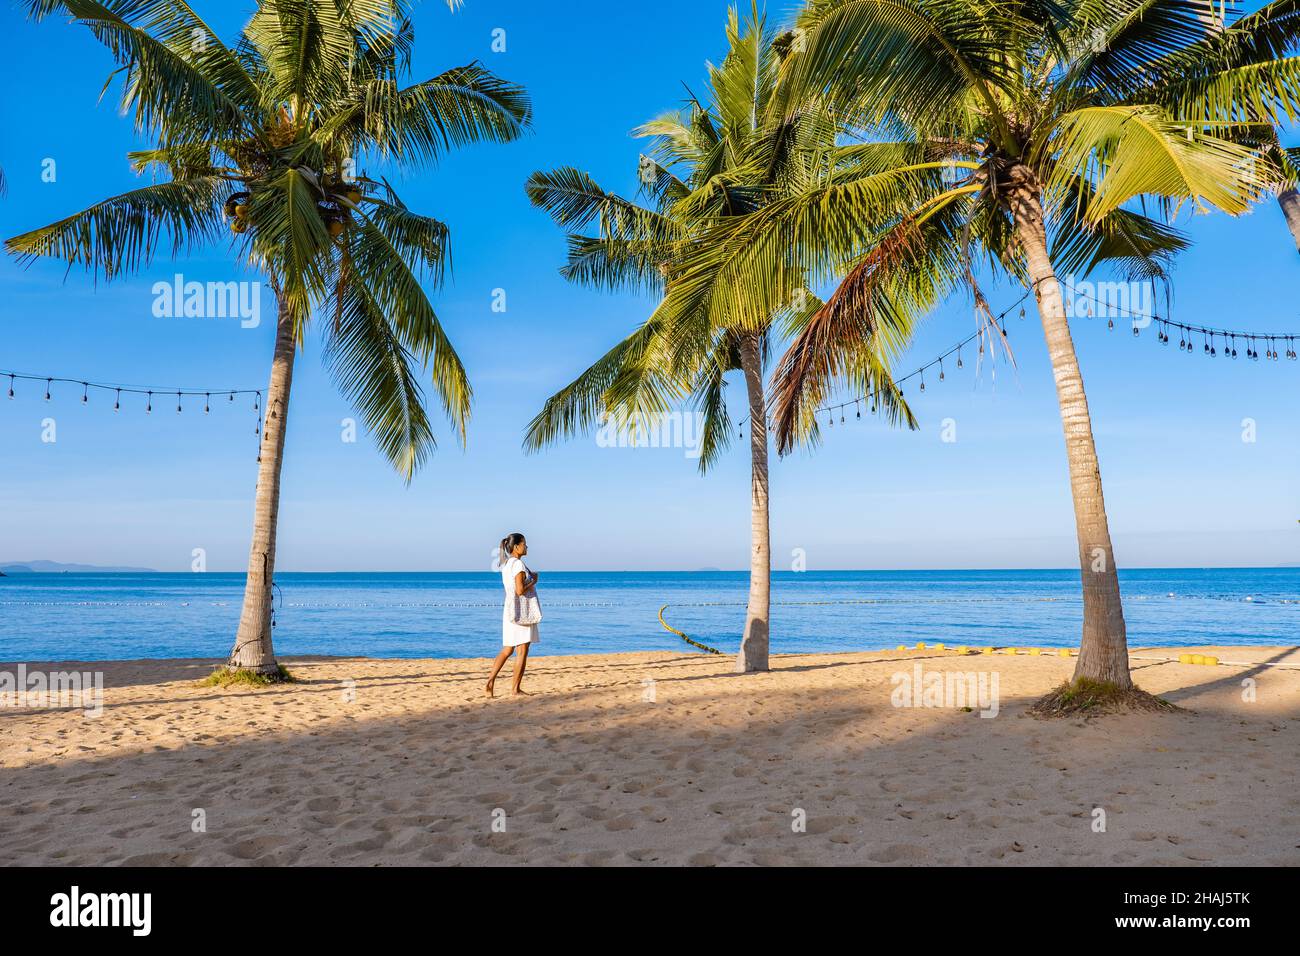 Na Jomtien Beach Pattaya Thailand, white tropical beach during sunset in Pattaya Najomtien. Asian woman walking at the beach with palm trees, tropical beach Stock Photo